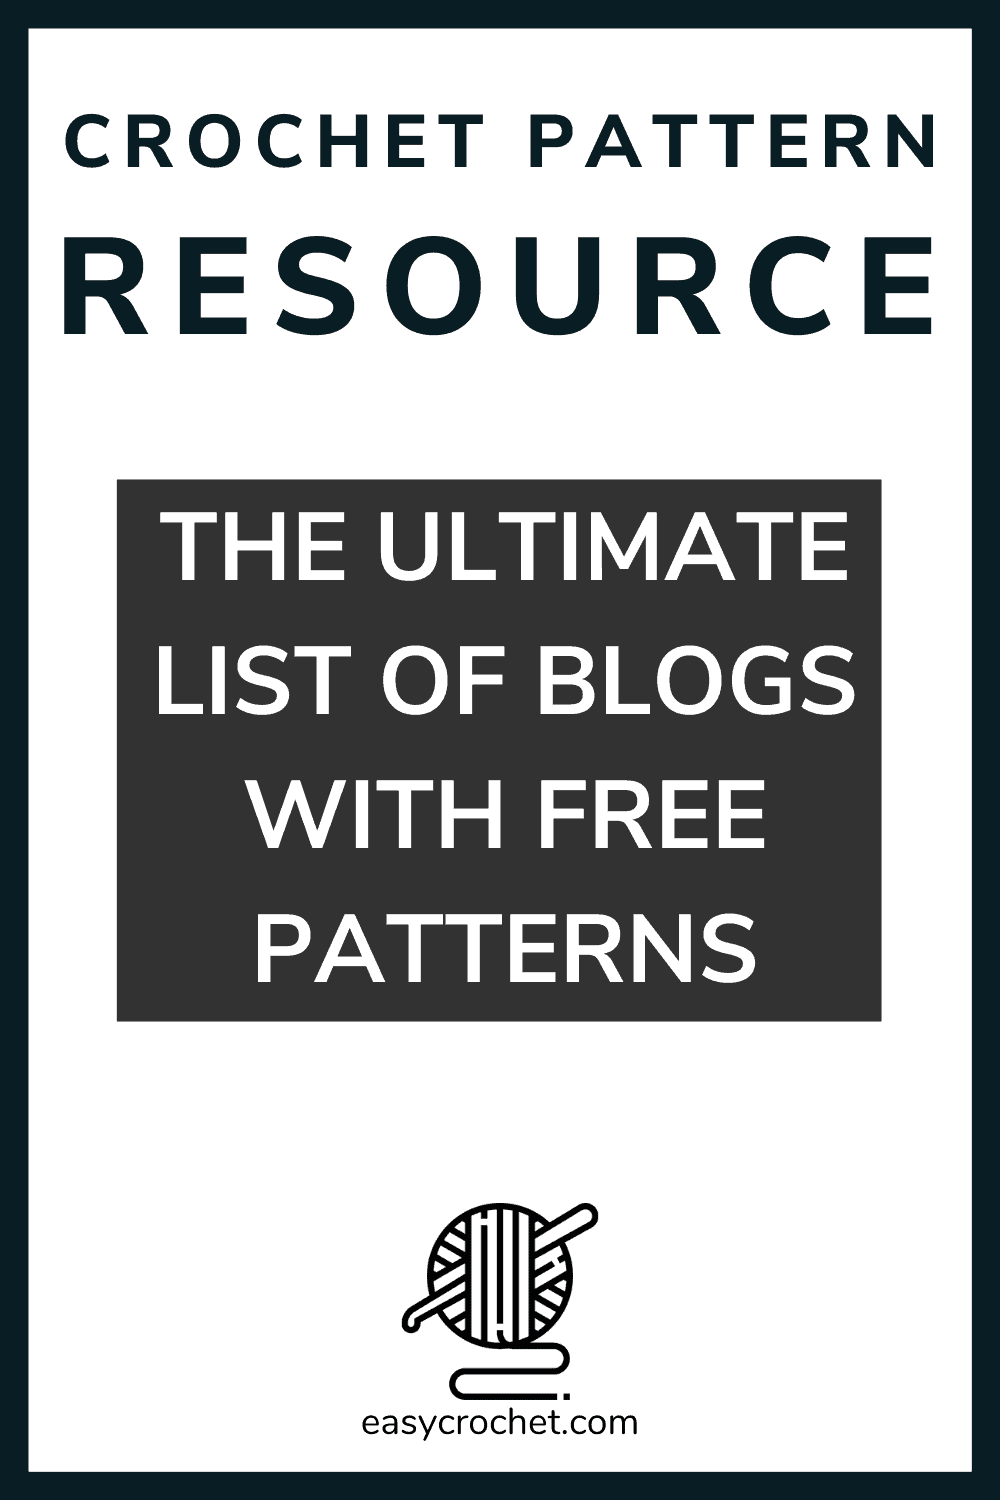 List of Blogs with Free Crochet Patterns